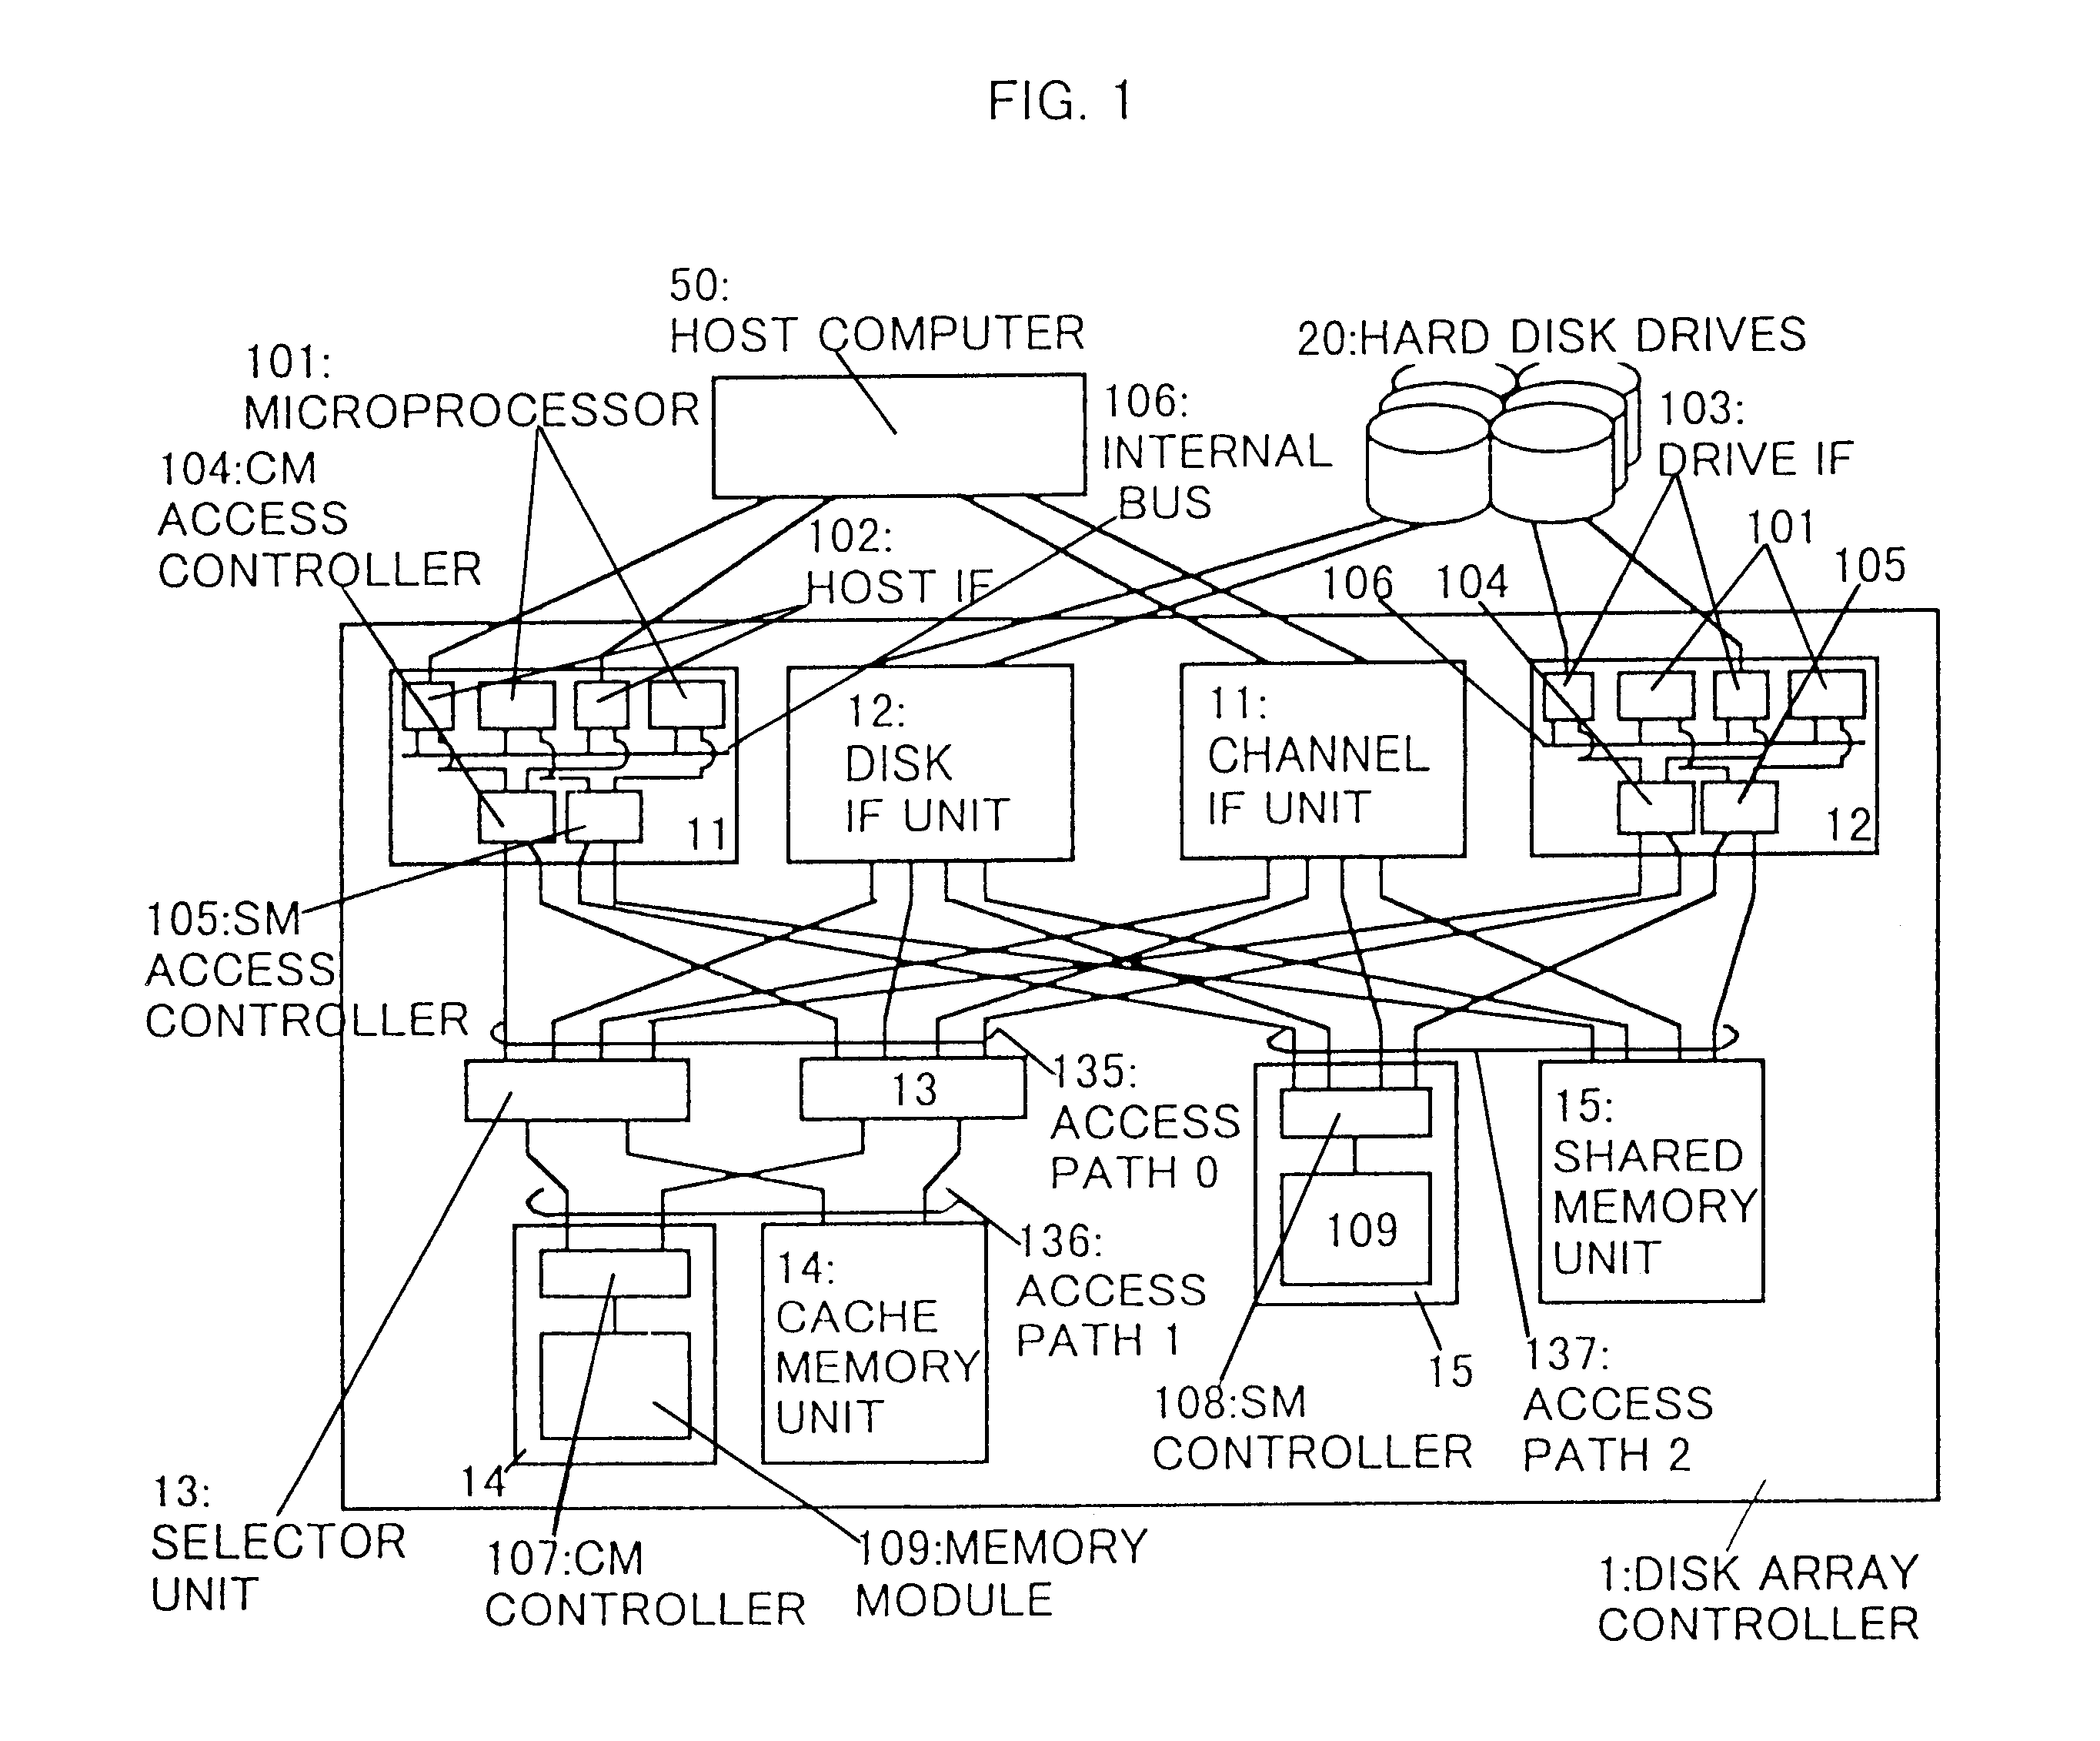 Disk array control device with two different internal connection systems